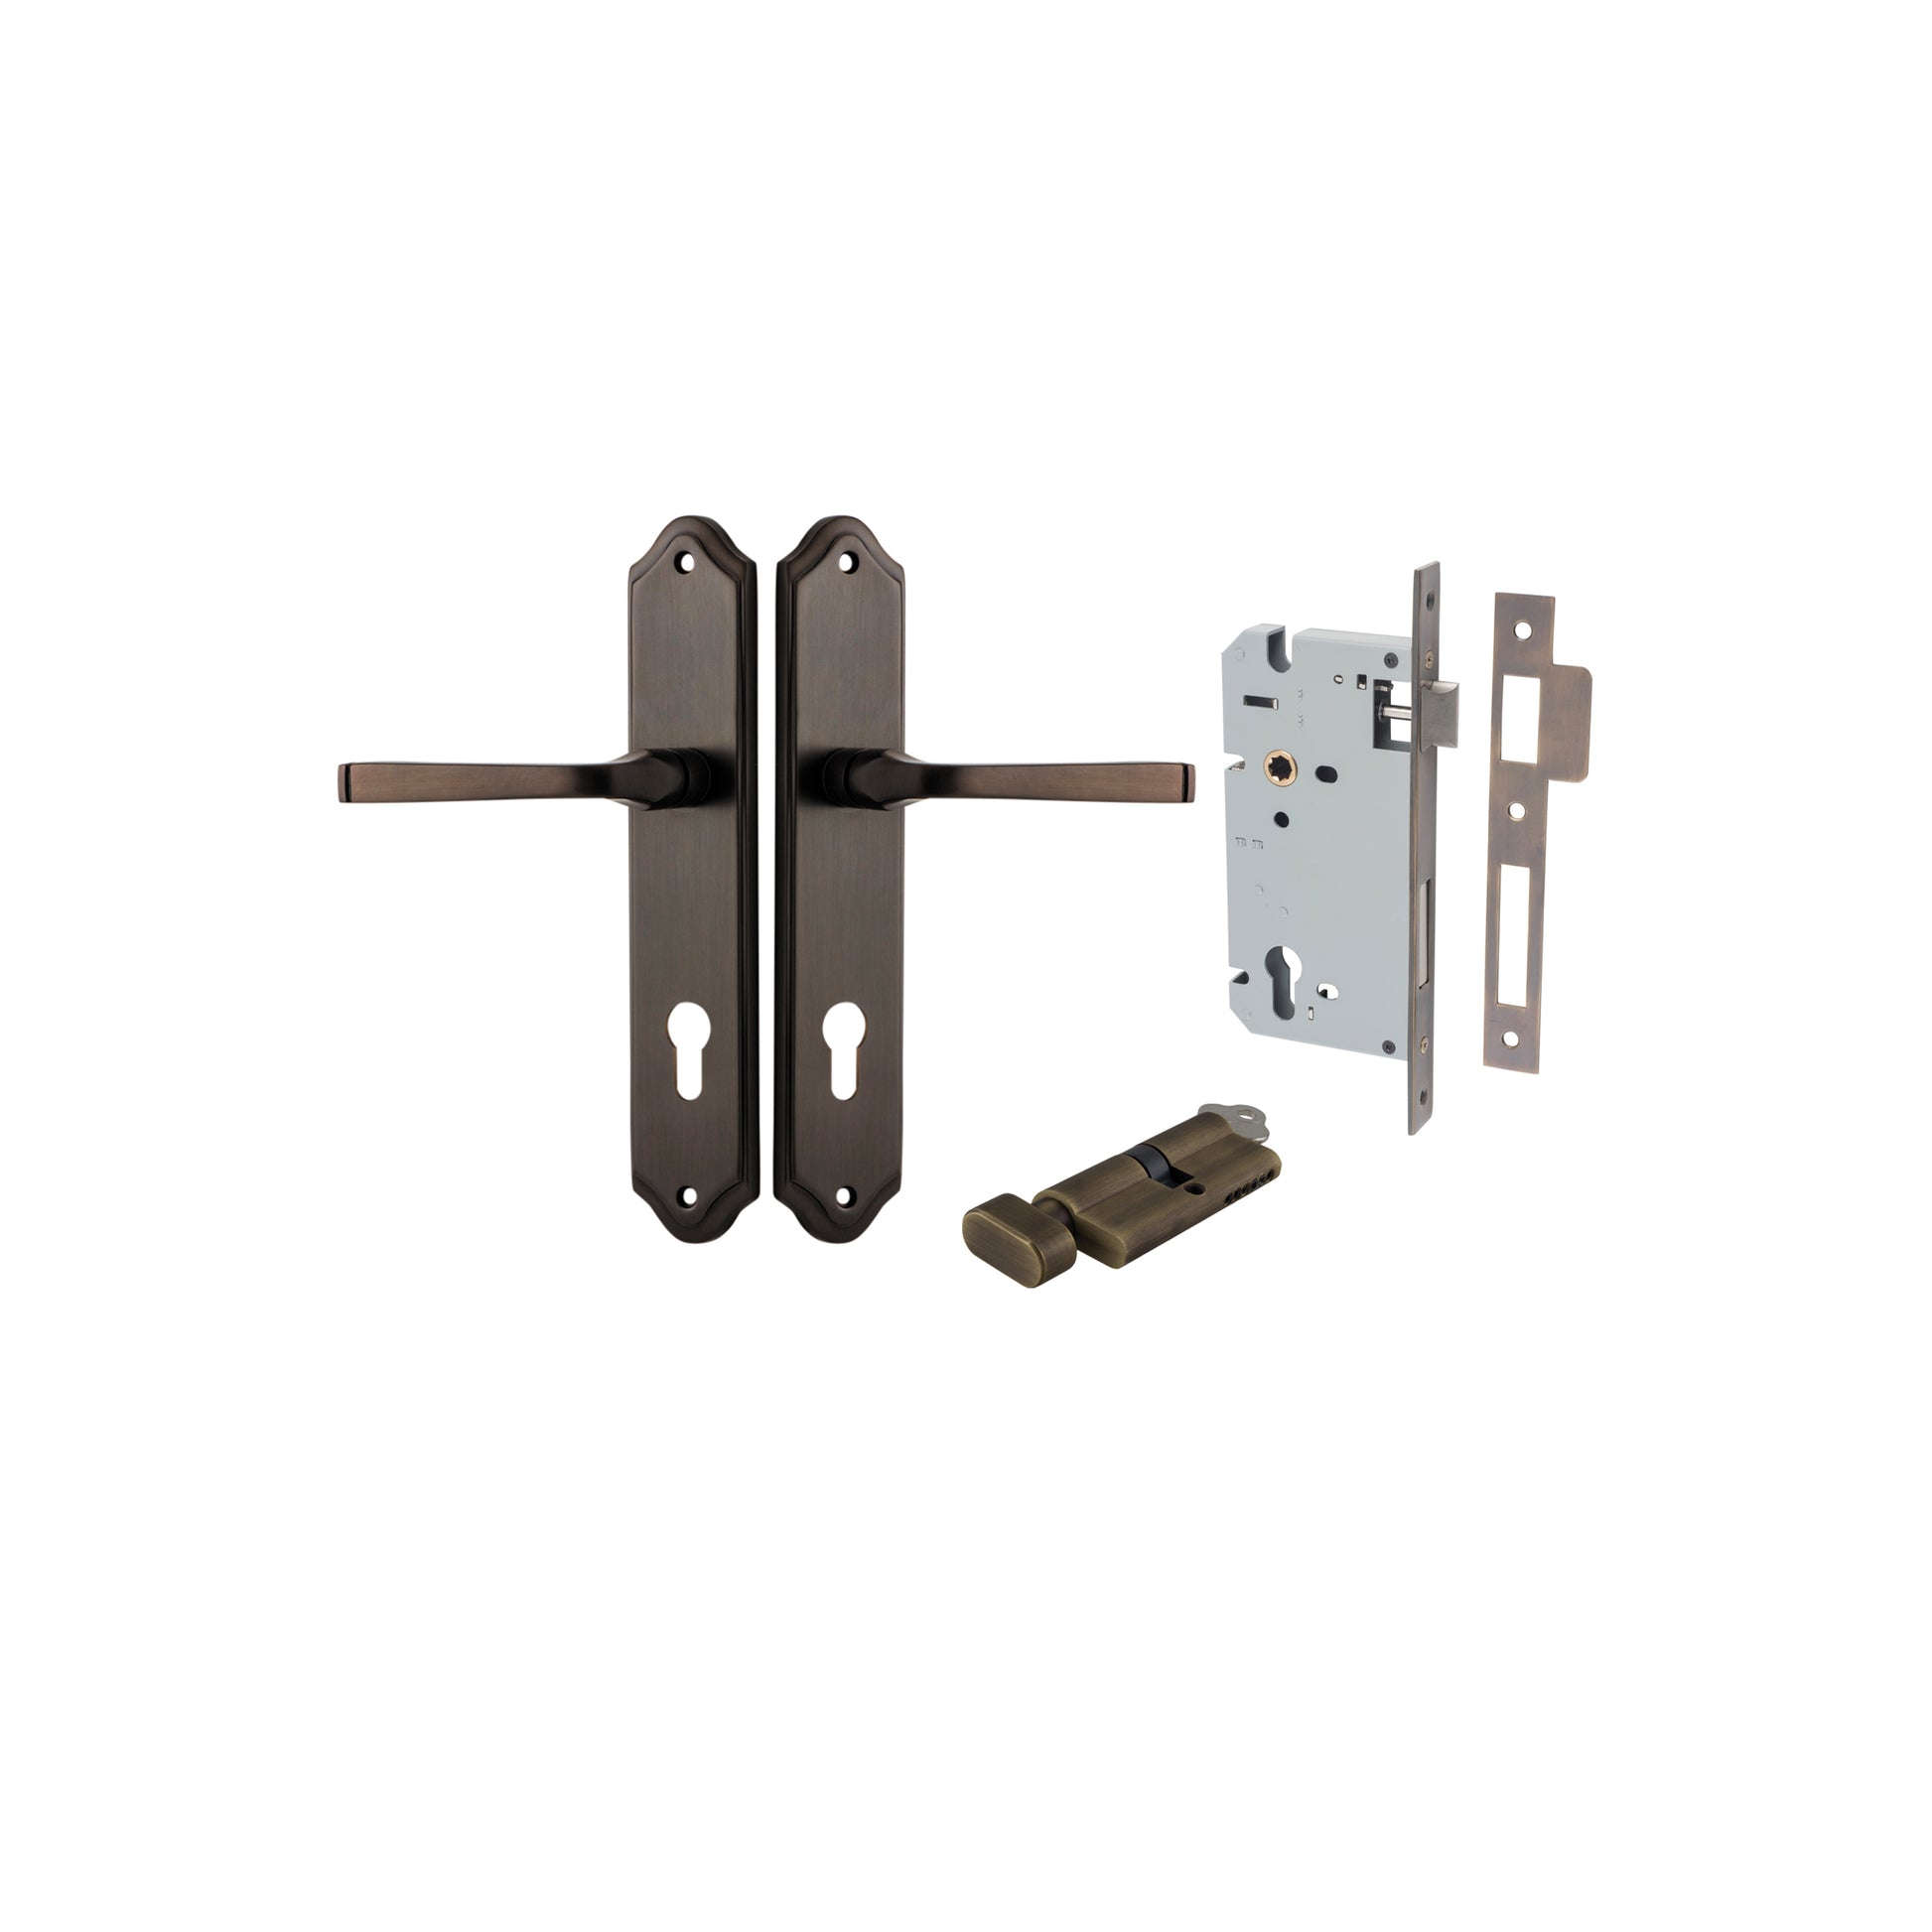 Door Lever Annecy Shouldered Euro Signature Brass CTC85mm H240xW50xP65mm Entrance Kit, Mortice Lock Euro Signature Brass CTC85mm Backset 60mm, Euro Cylinder Key Thumb 6 Pin Signature Brass L70mm KA1 in Signature Brass